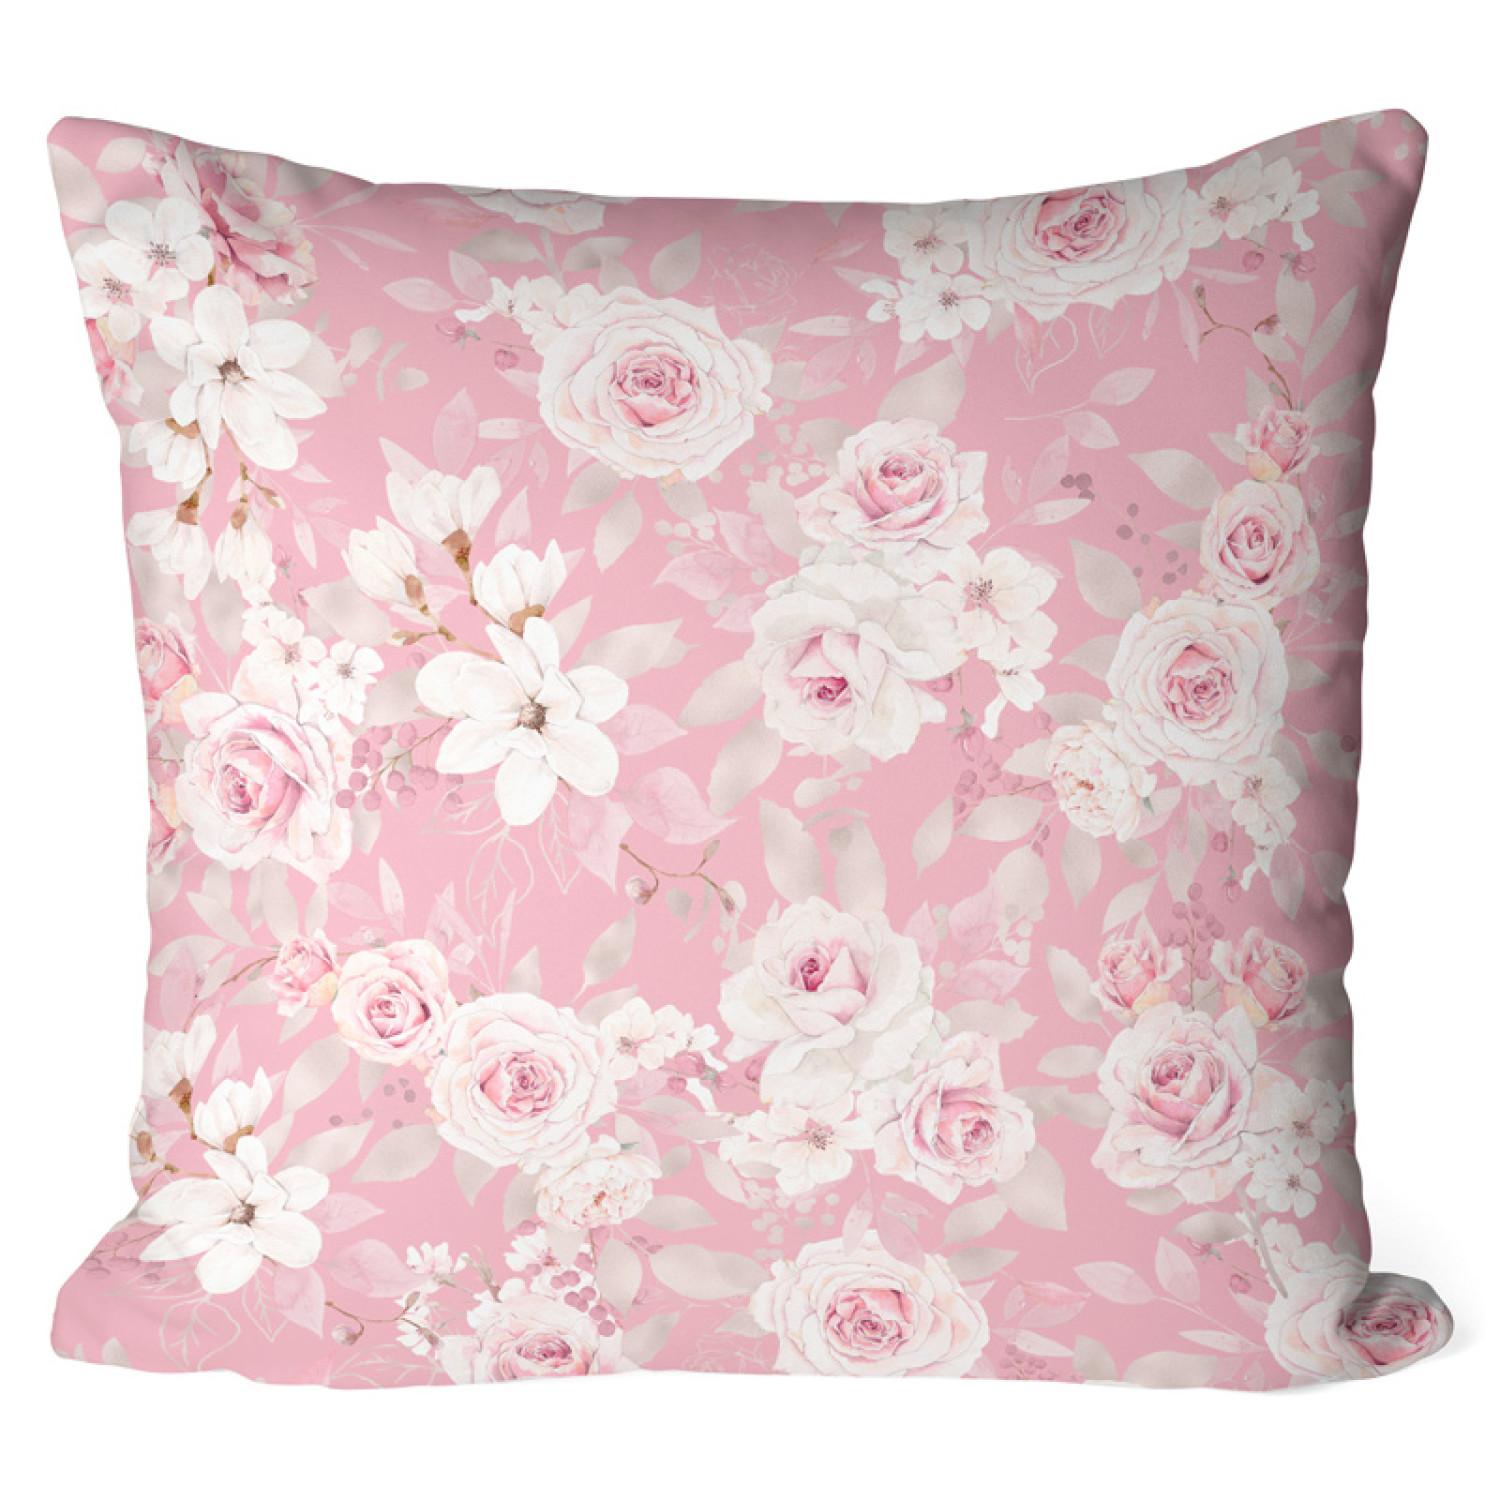 Decorative Microfiber Pillow Rose embrace - a delicate floral pattern in shades of pastel pink cushions